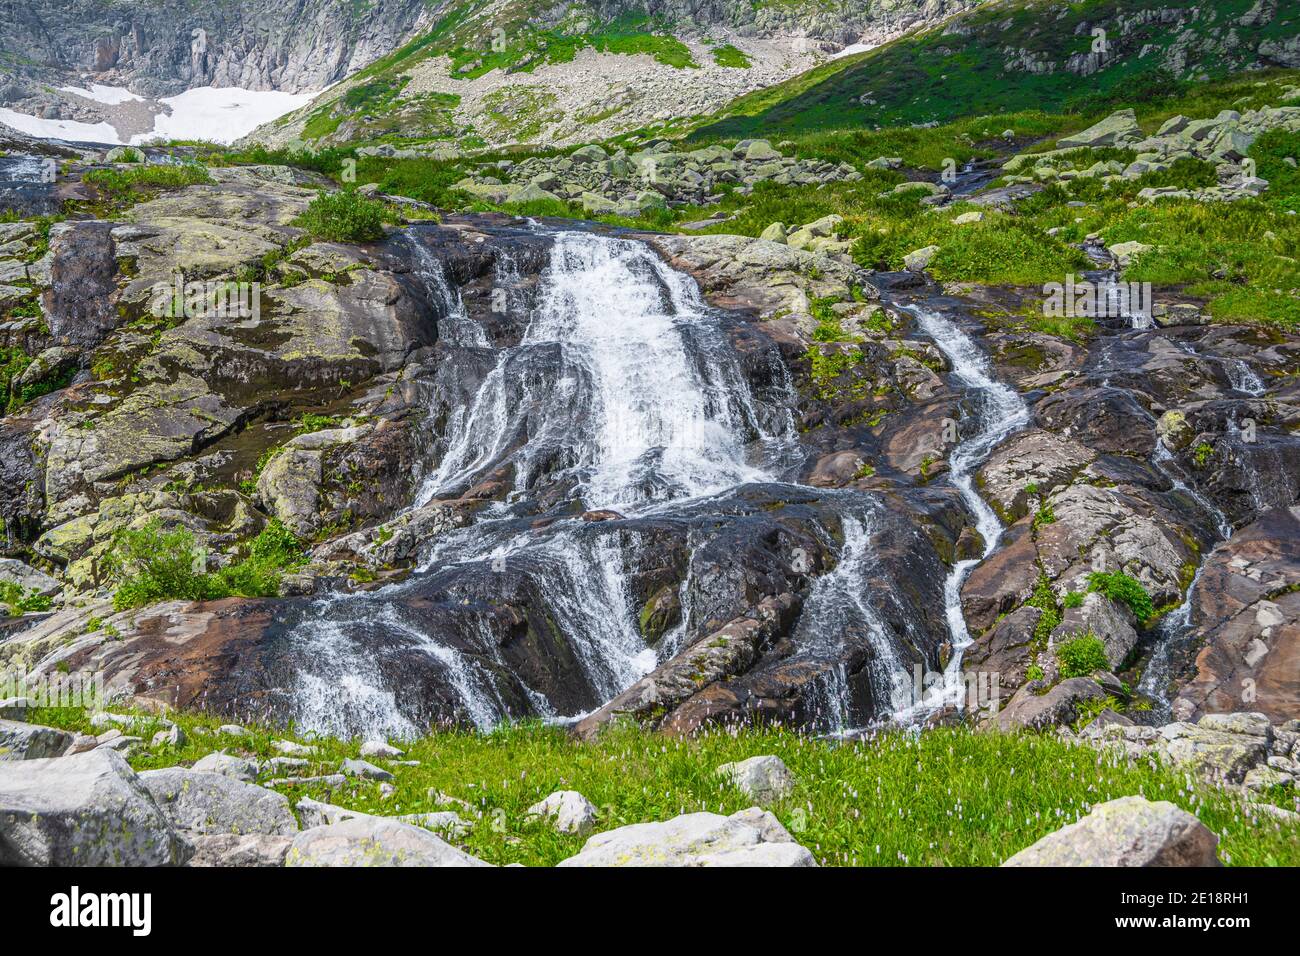 Rapid stream in mountain valley among grassy banks. Small waterfall in green meadow. Stock Photo